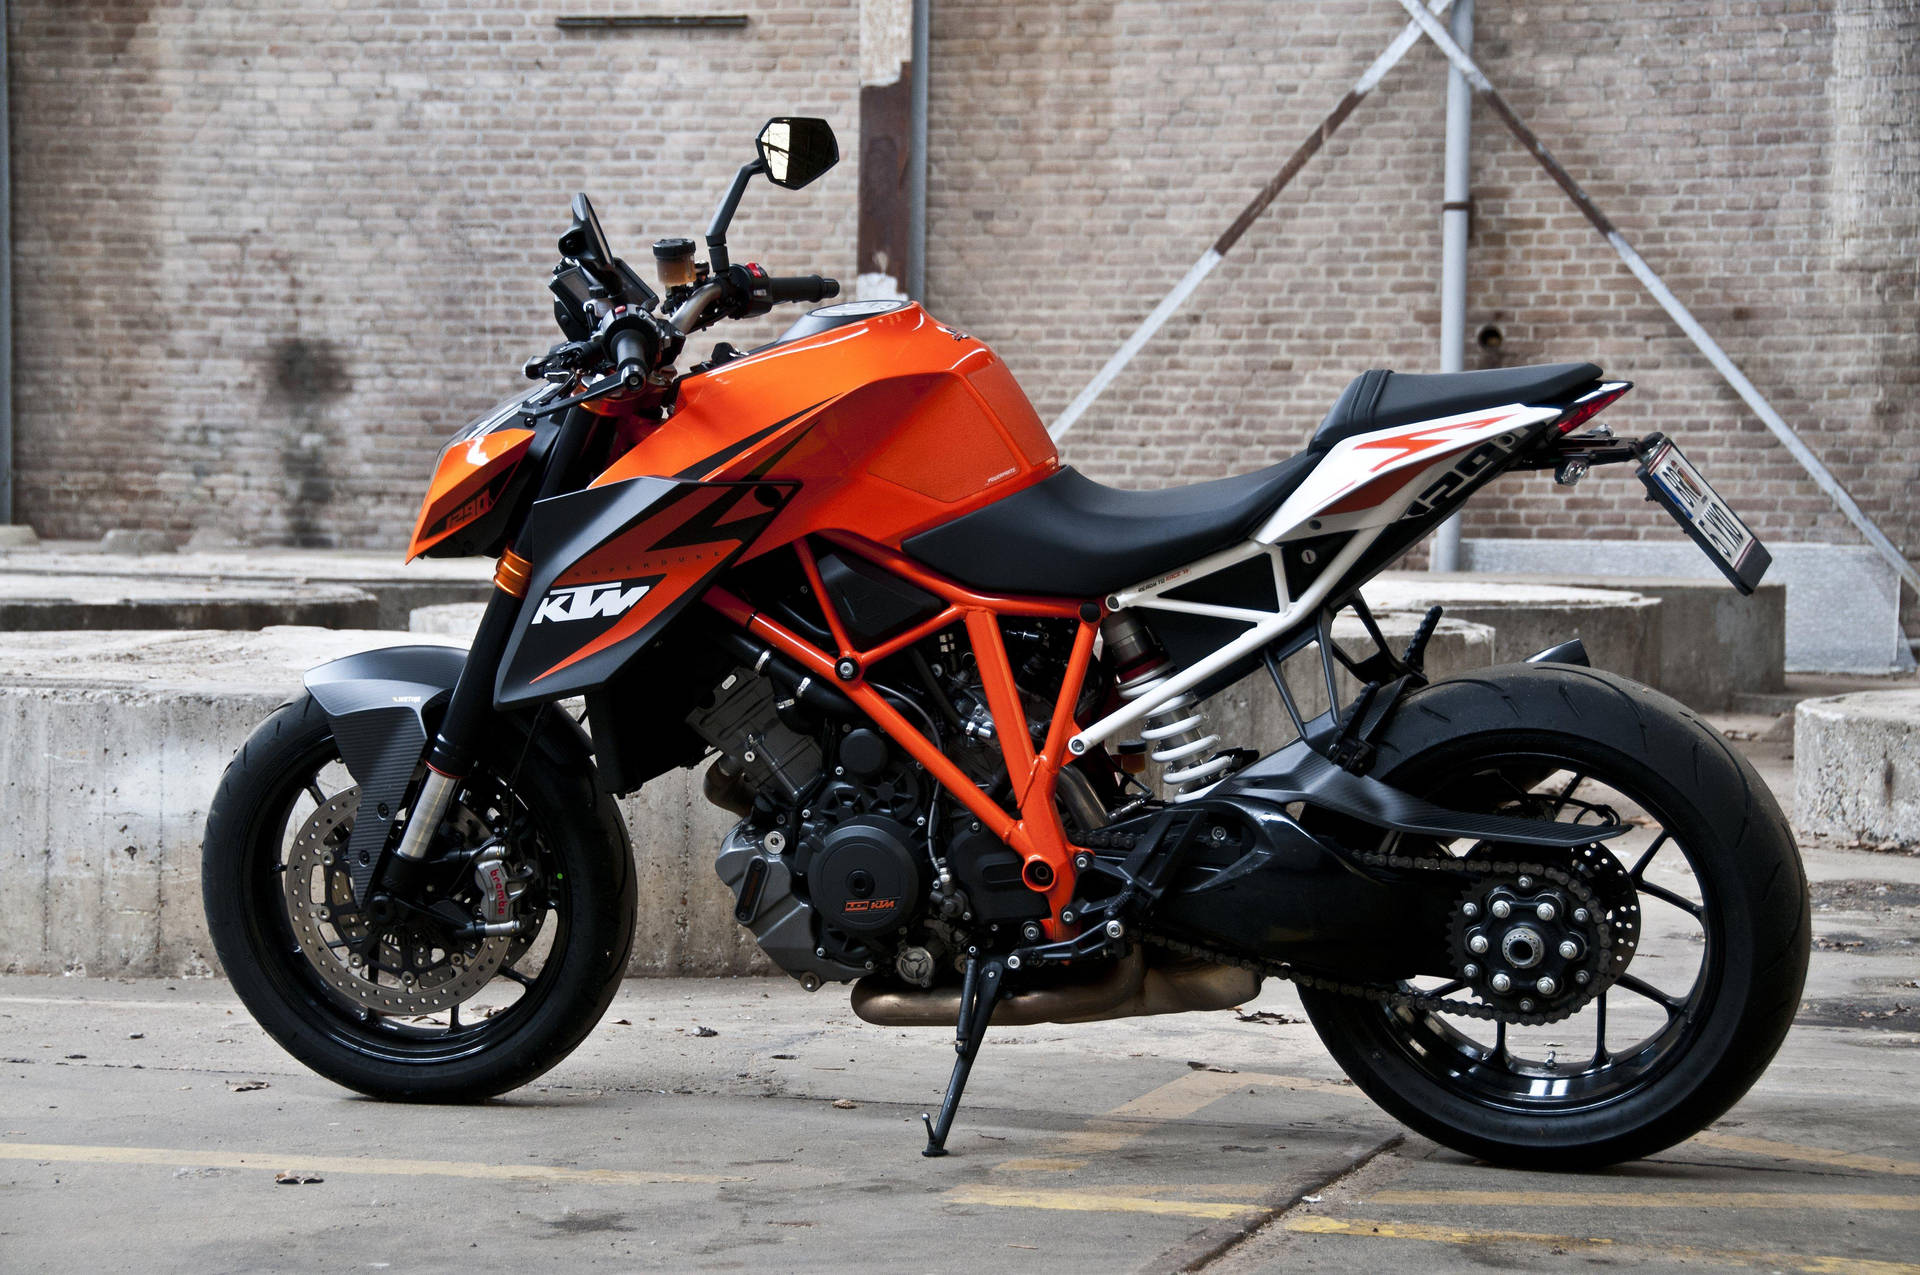 Stunning KTM 4K Monster Bike - A Symphony of Speed and Performance Wallpaper